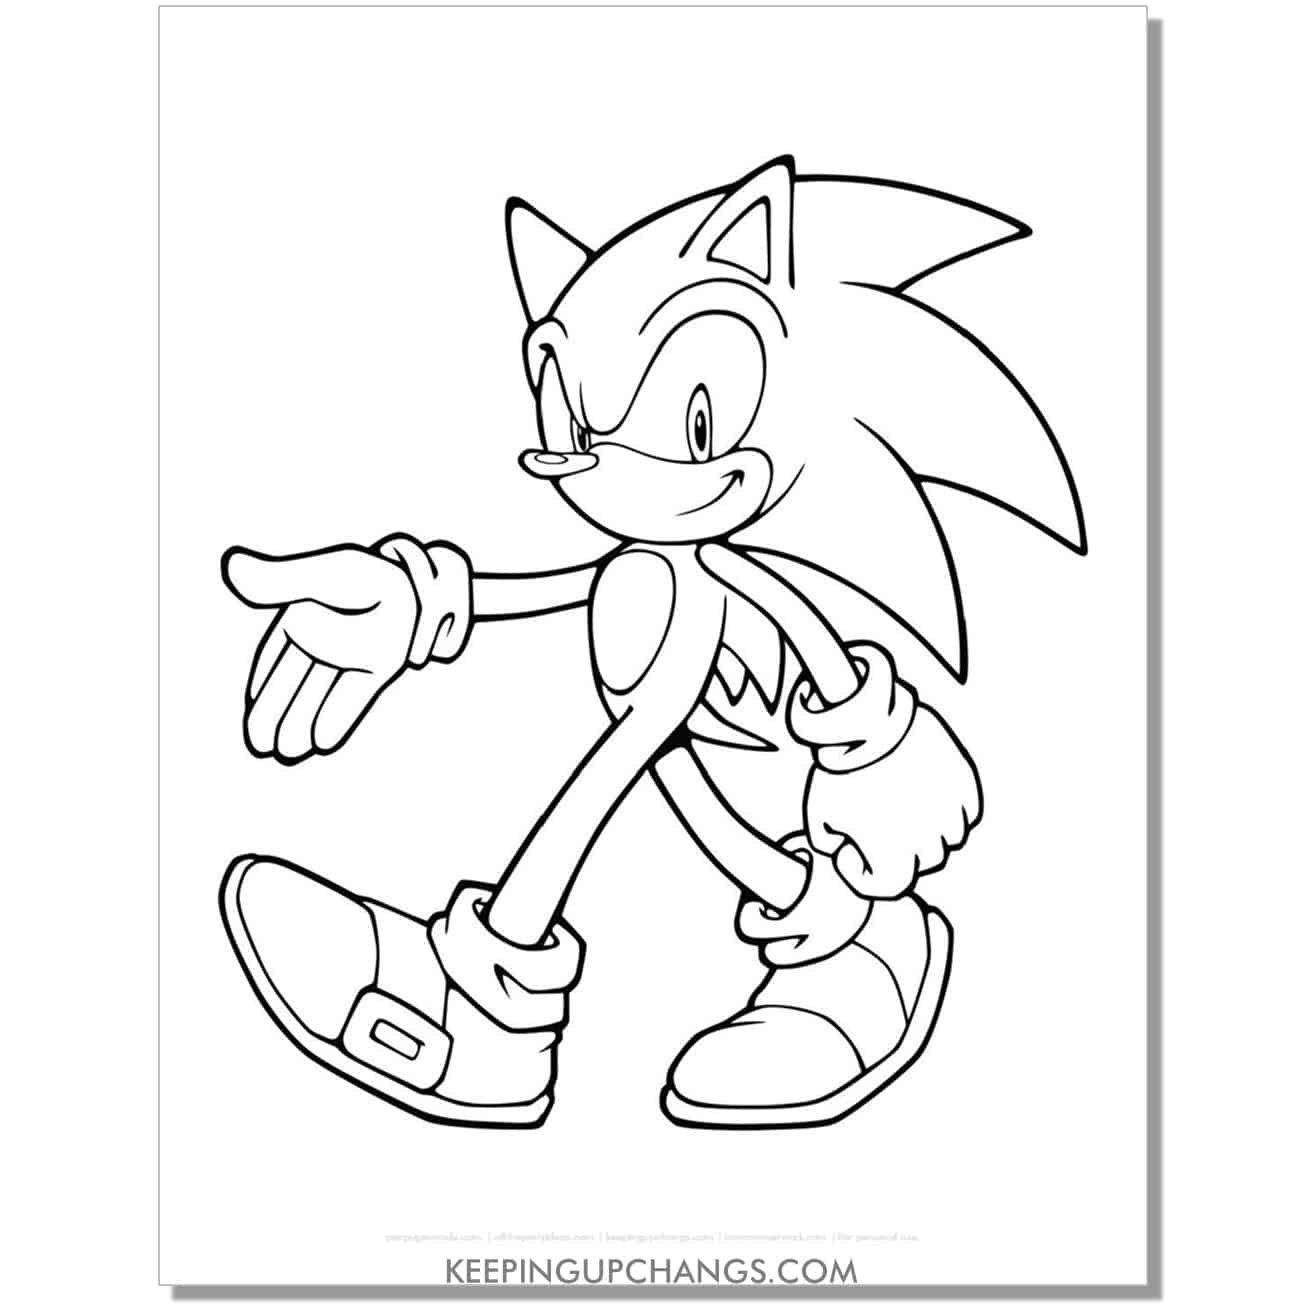 sonic walking coloring page.